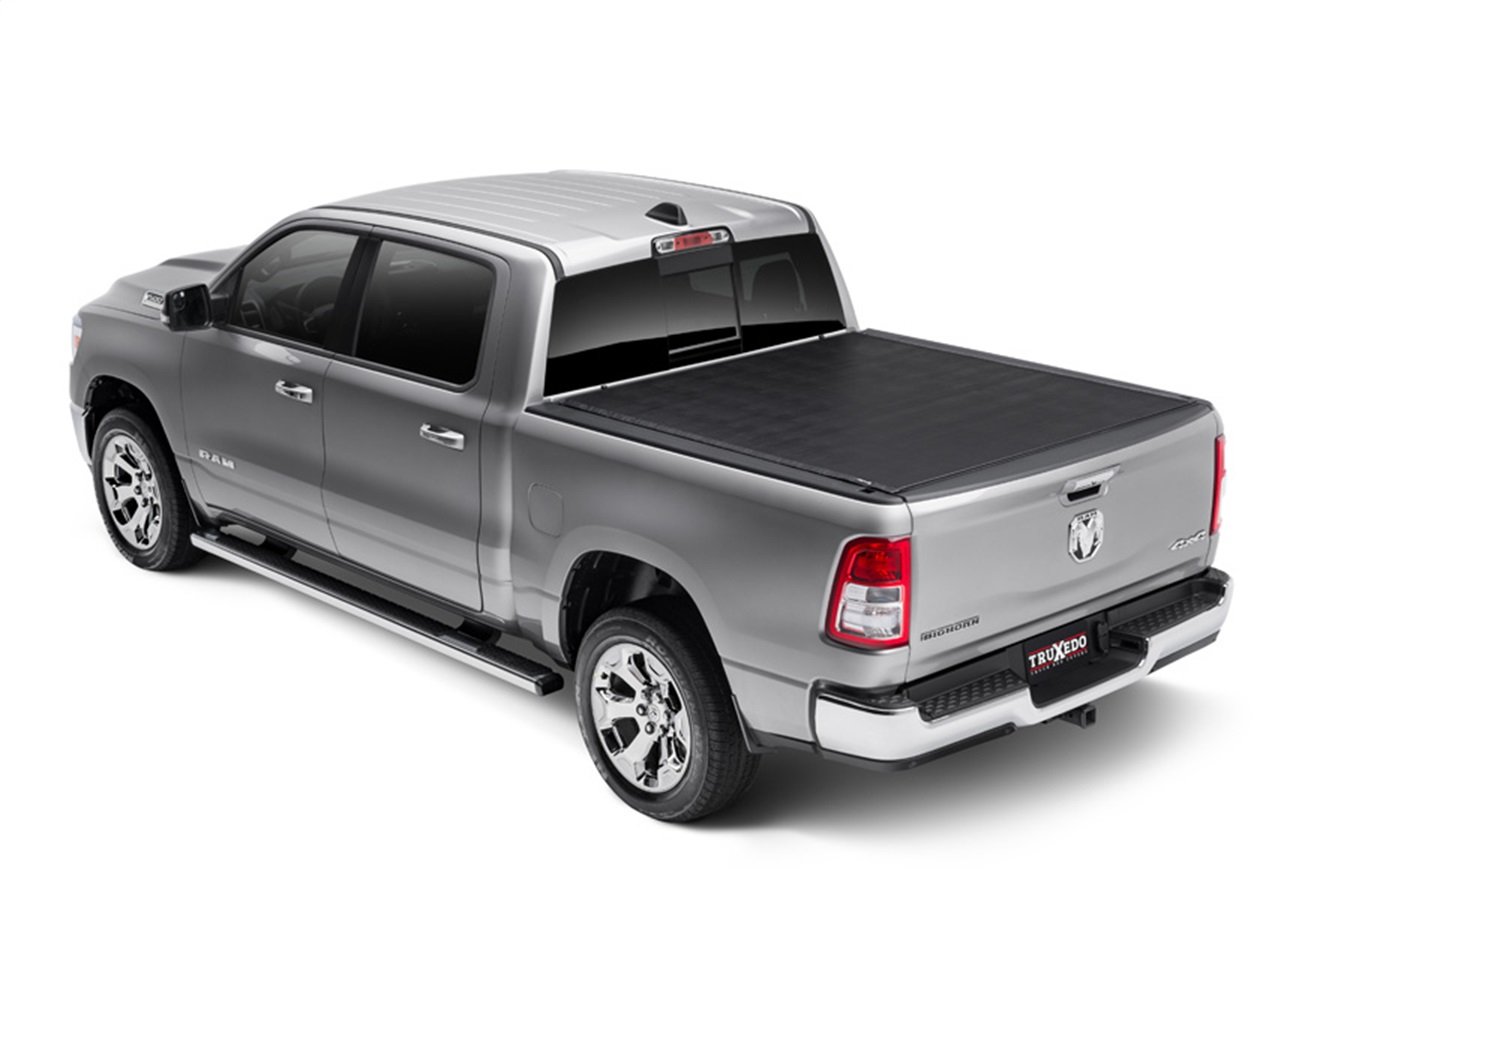 Sentry Roll-Up Tonneau Cover Fits Select Ram 1500 (New Style), With Multifunction Tailgate, Bed Length: 5 ft. 7 in.